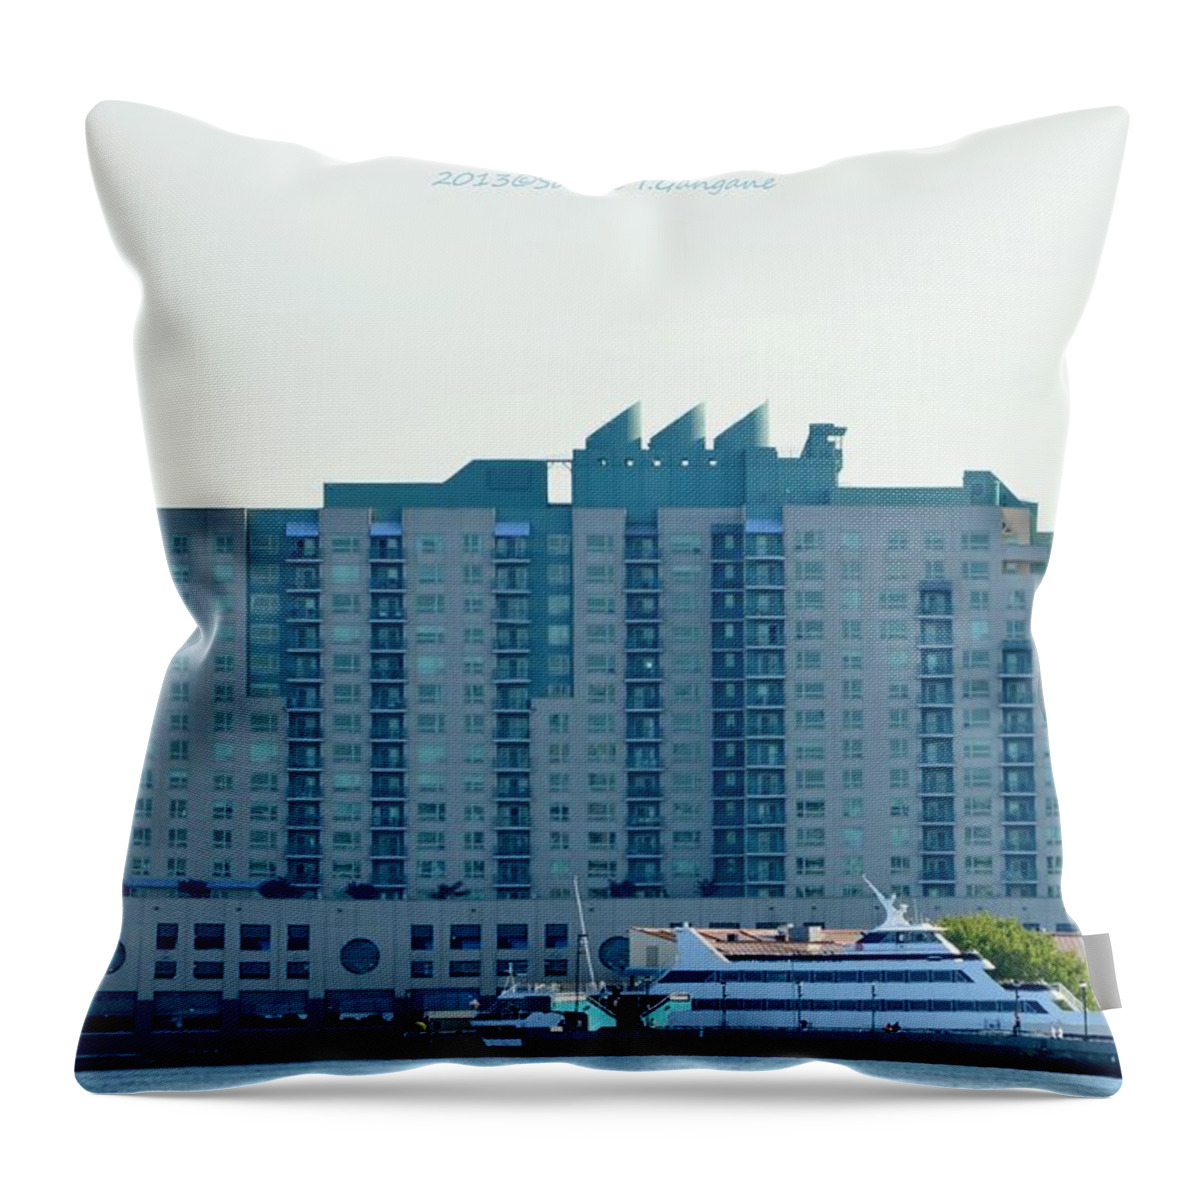 Ship Throw Pillow featuring the photograph Ship Restaurant by Sonali Gangane